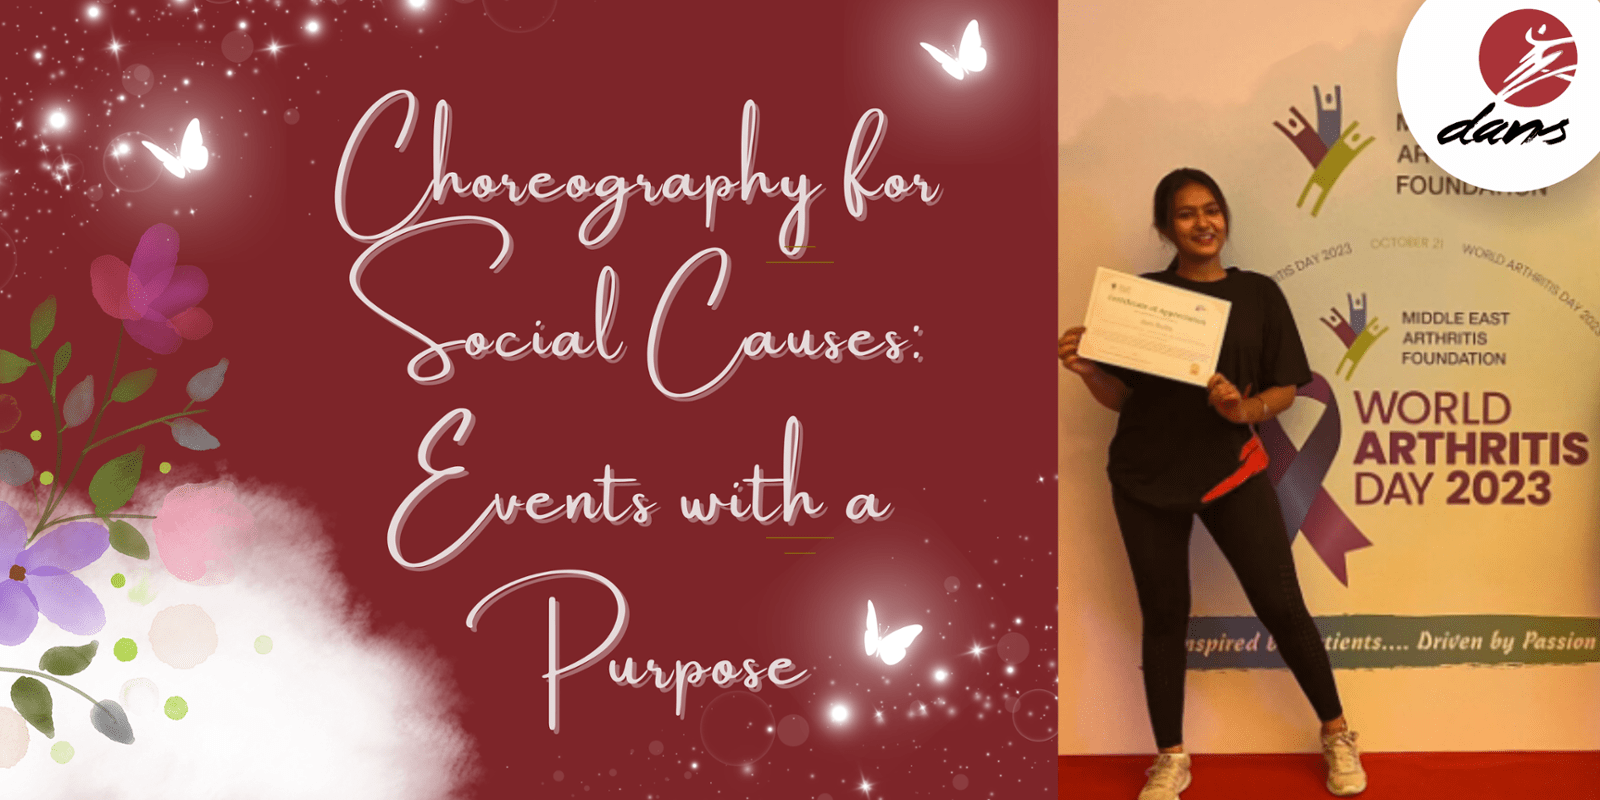 Choreography for Social Causes: Events with a Purpose